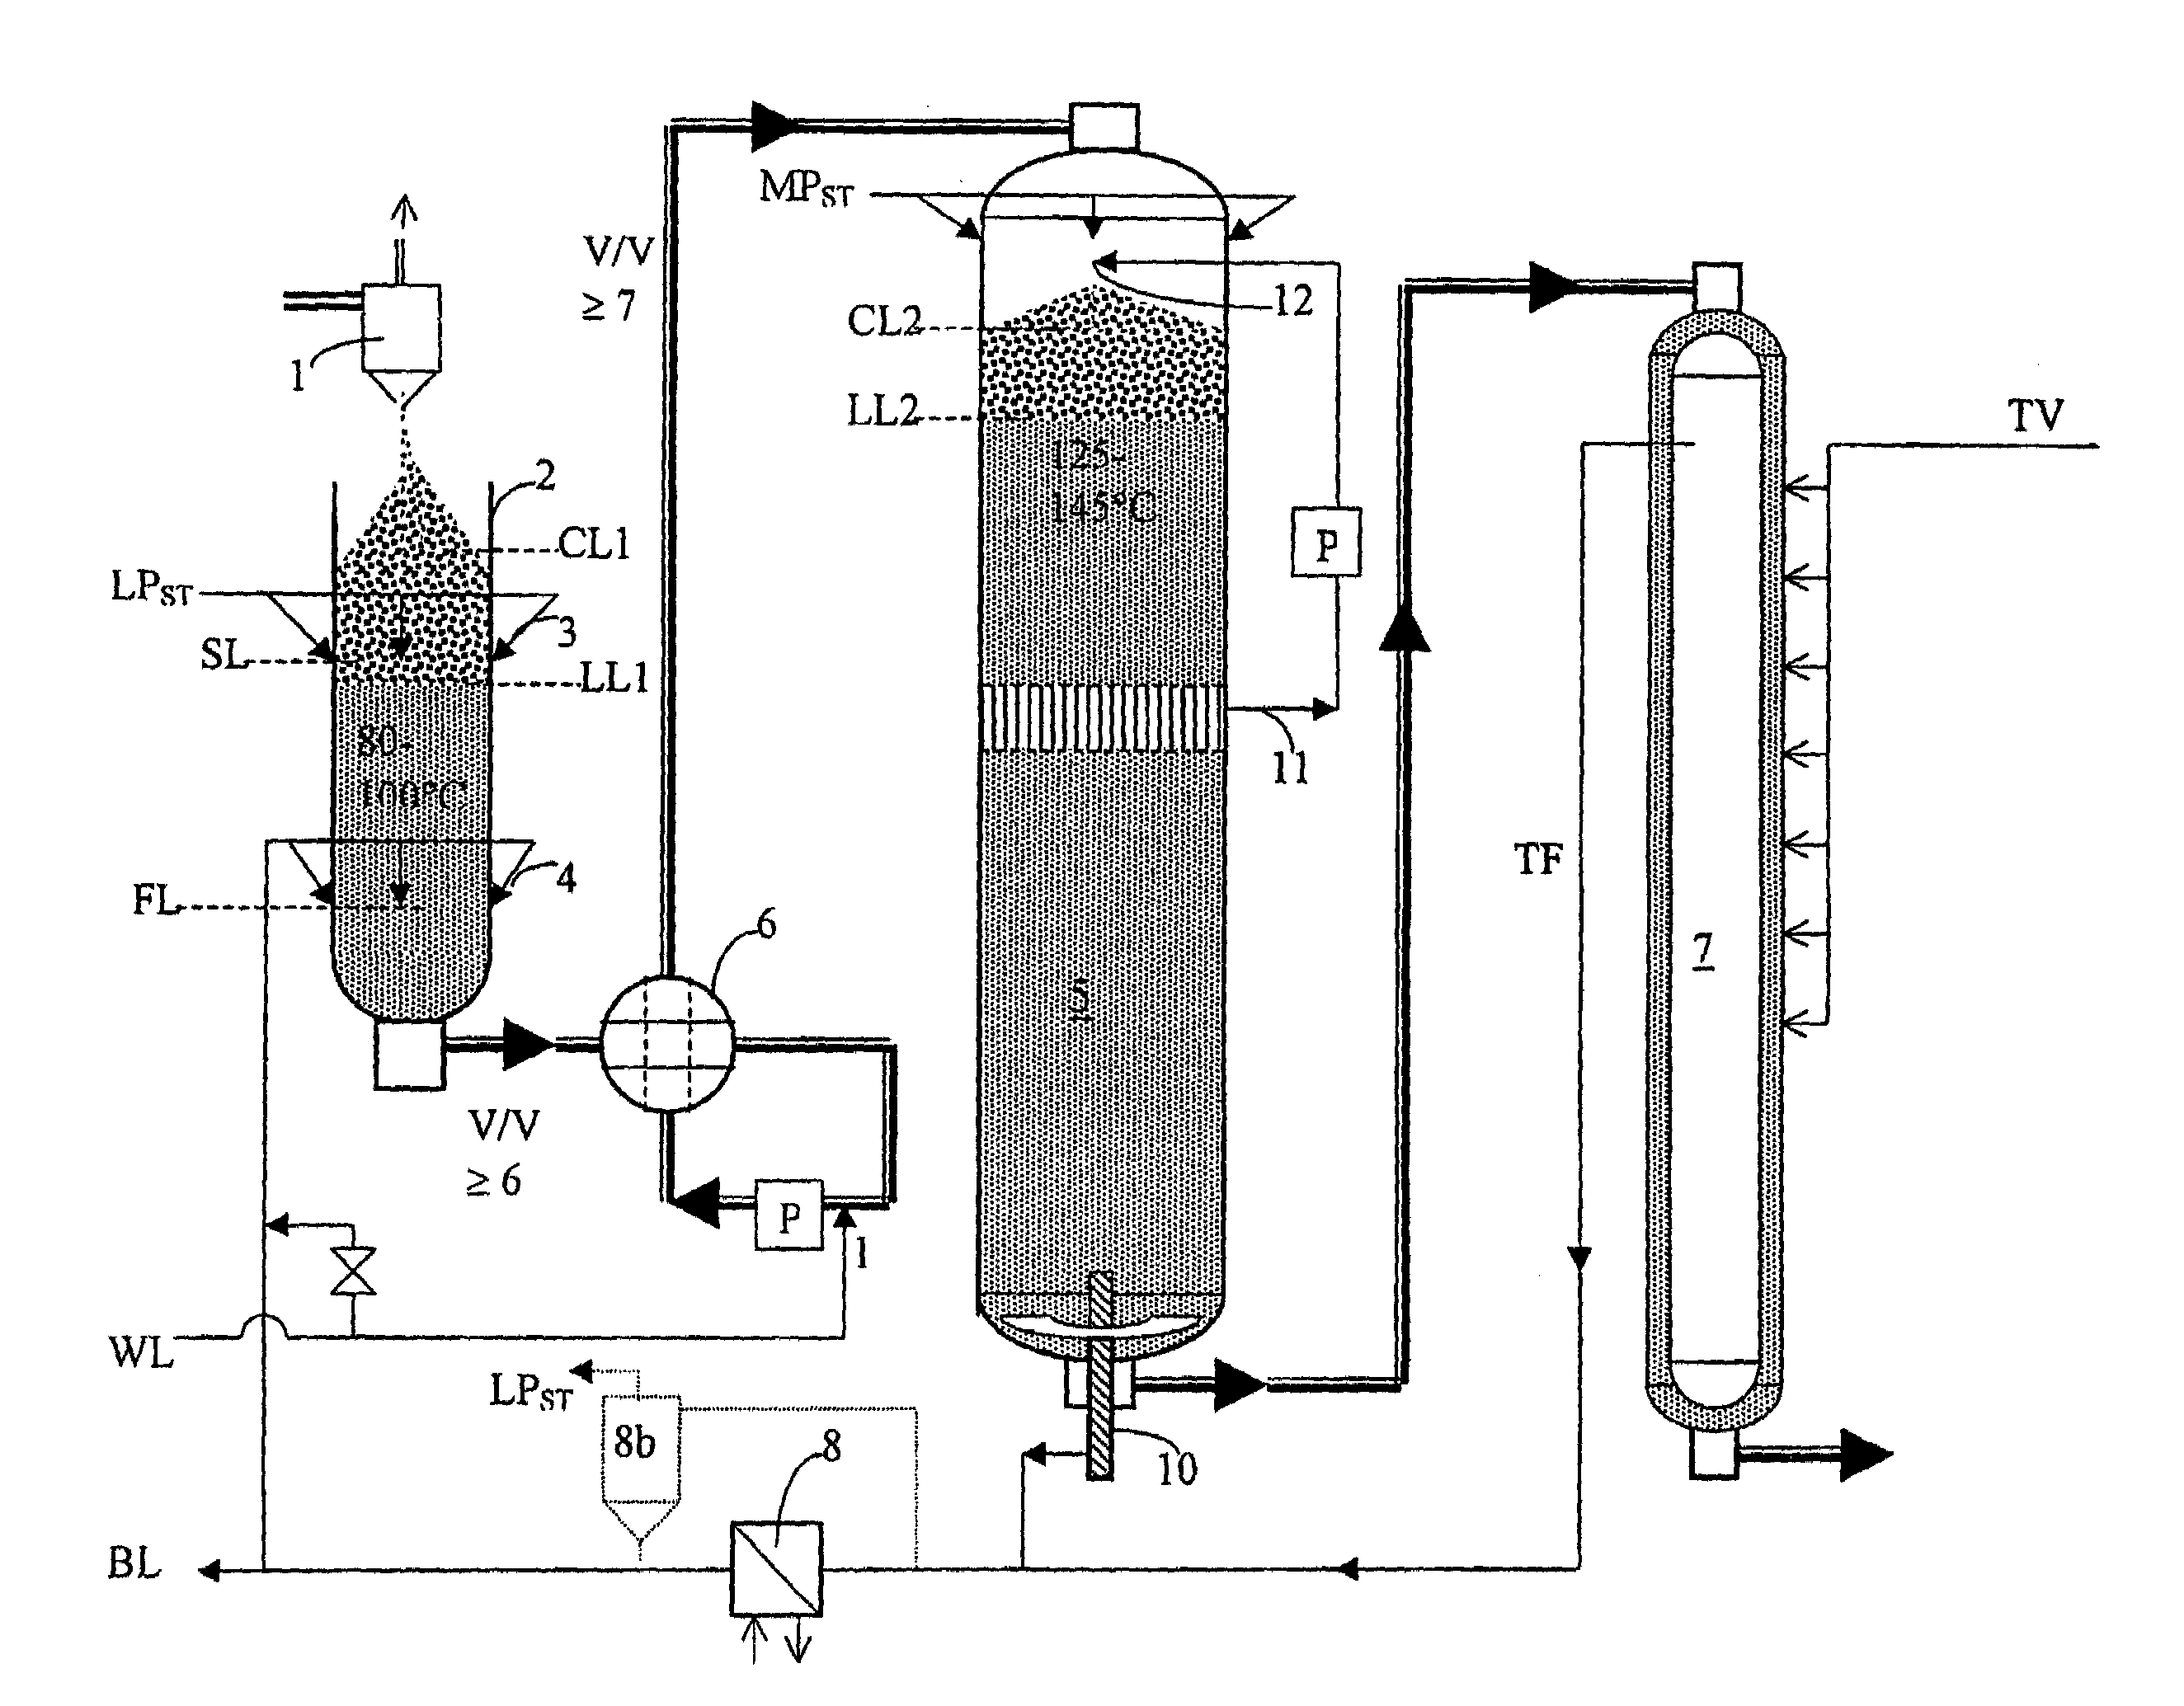 Method for the continuous cooking of wood raw material for cellulose pulp